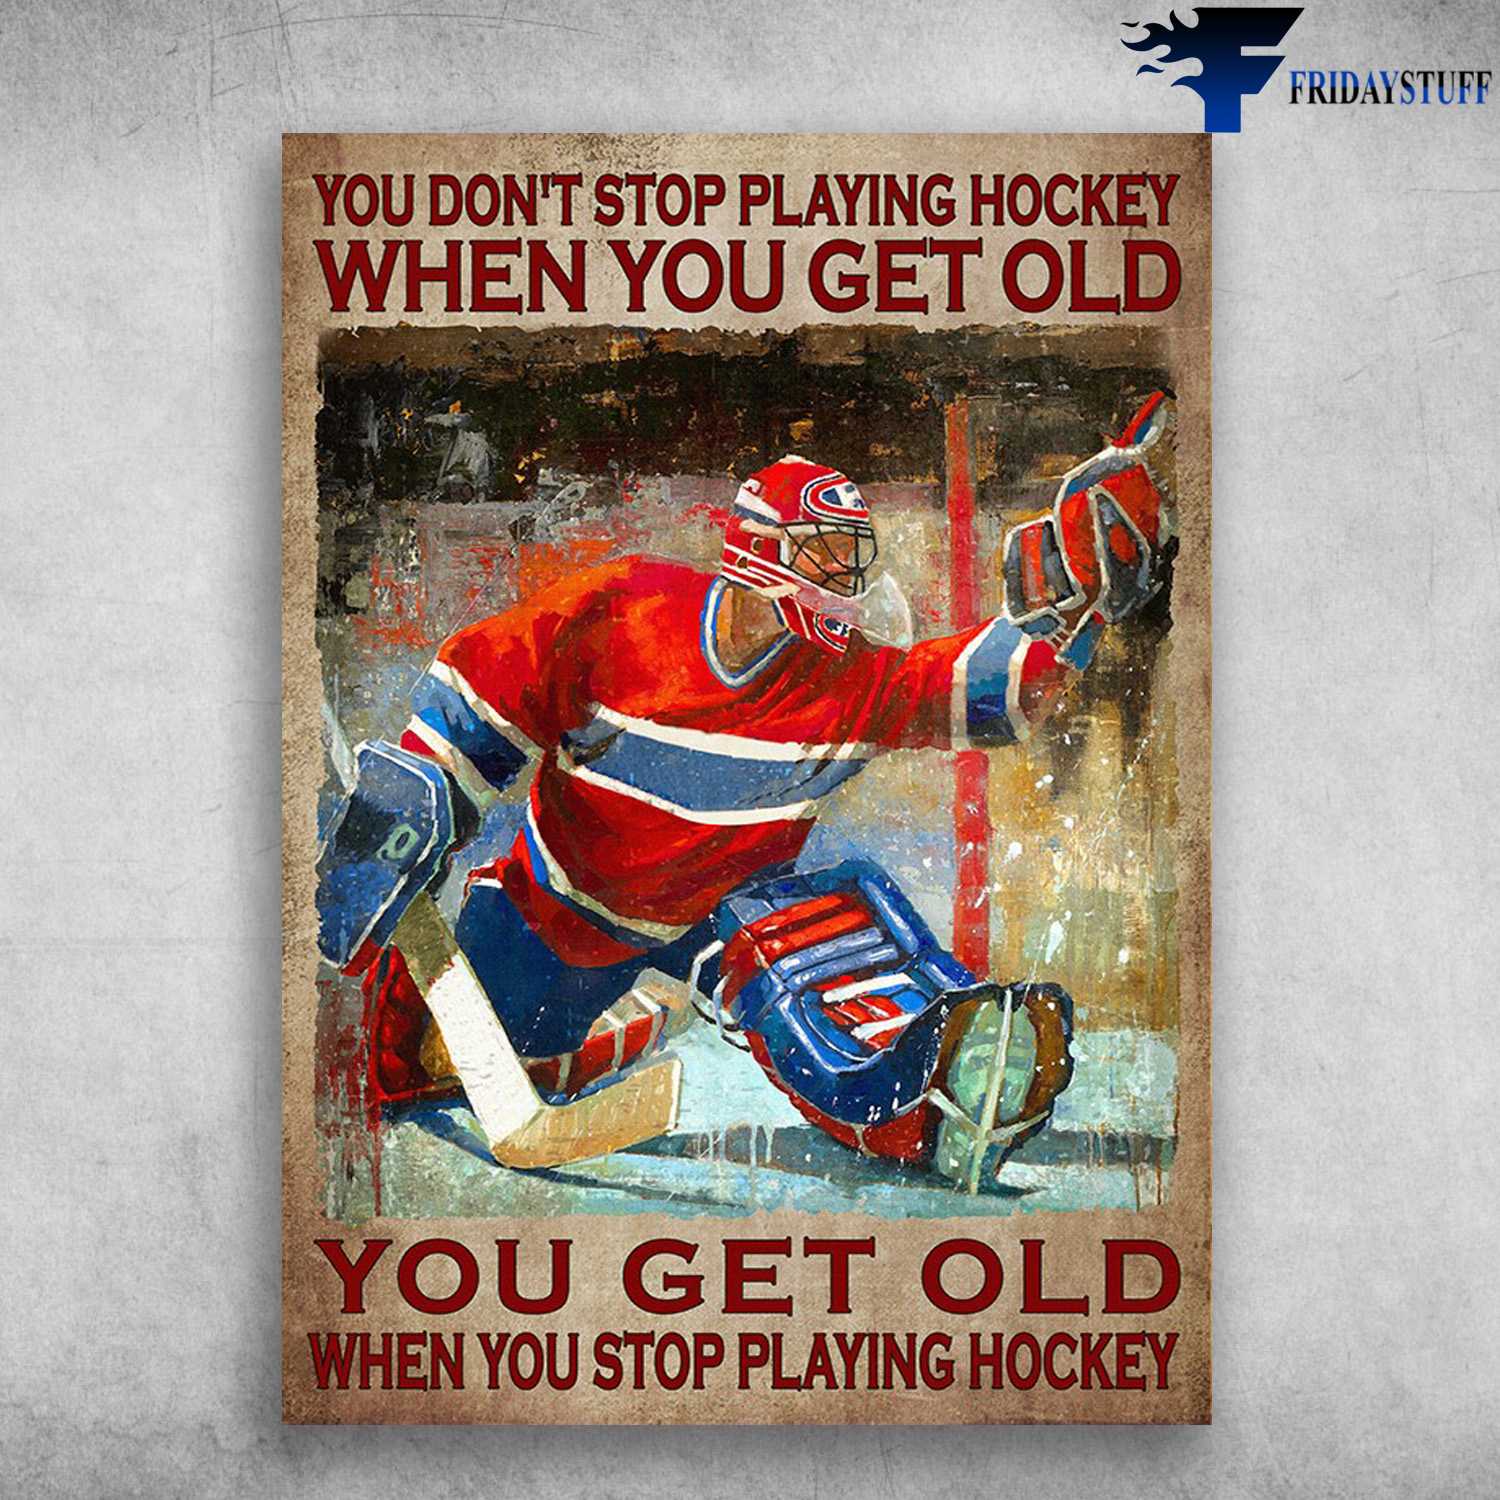 Hockey Player - You Don't Stop Playing Hockey When You Get Old, You Get Old When You Stop Playing Hockey